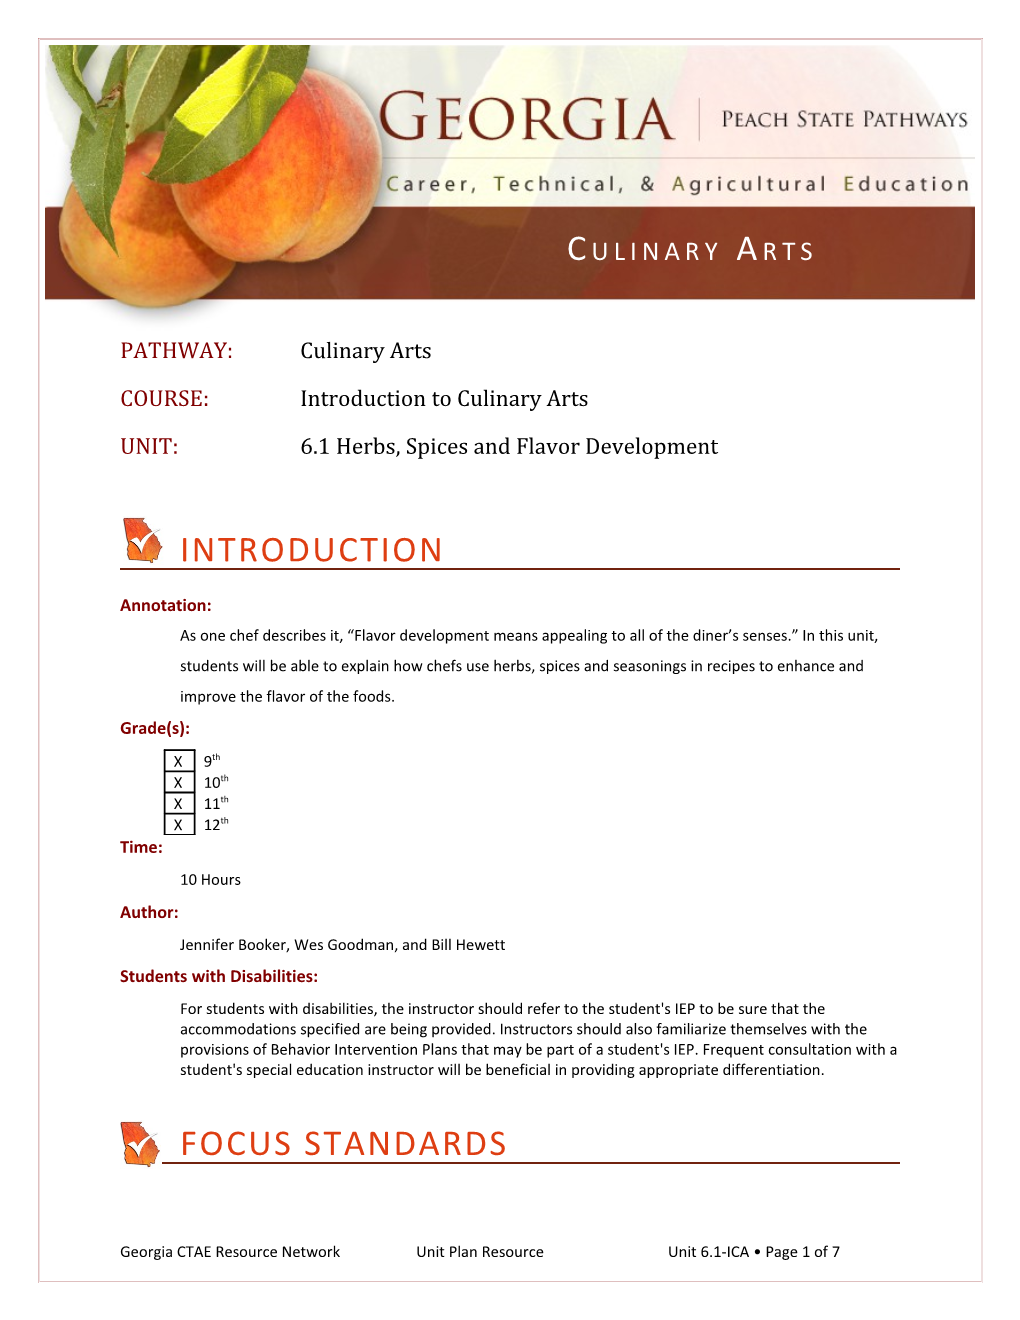 COURSE: Introduction to Culinary Arts